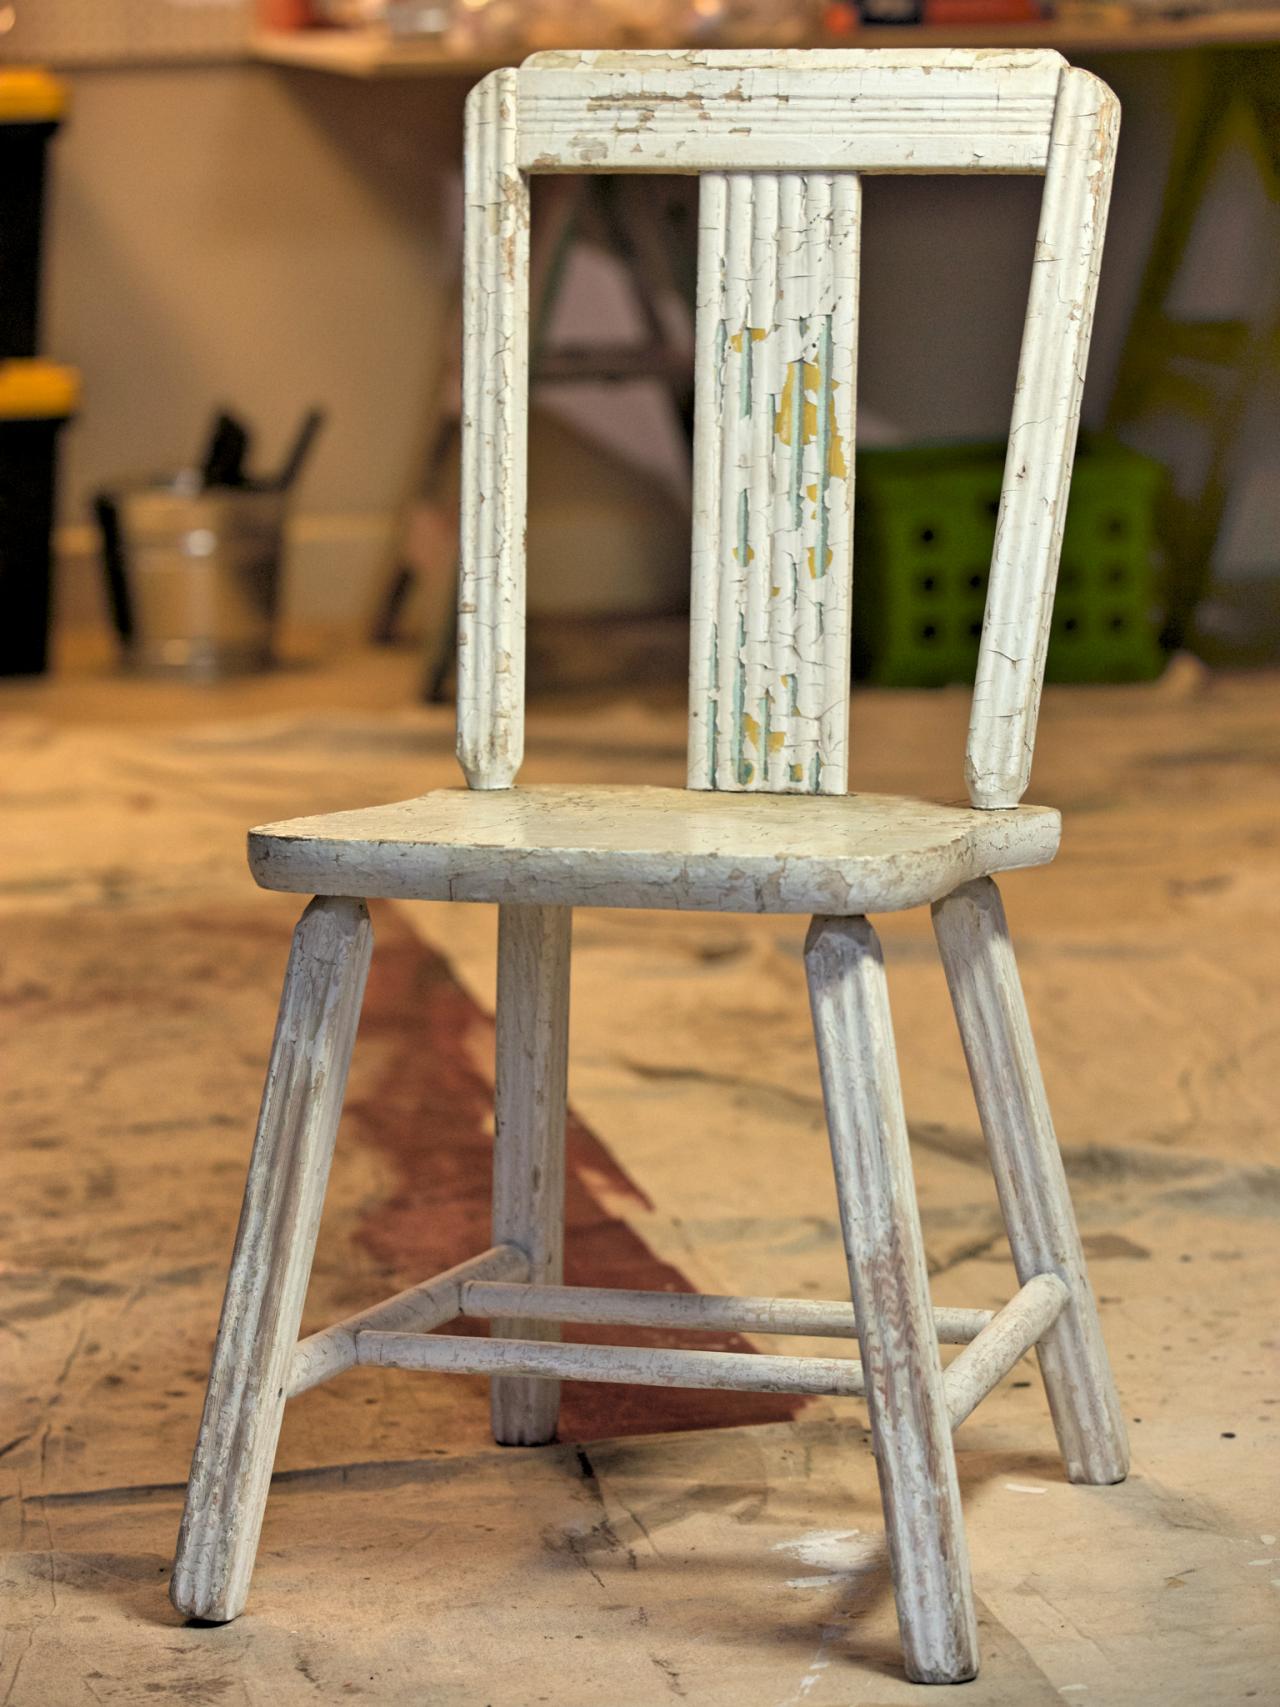 How To Strip And Repaint A Wood Chair How Tos Diy